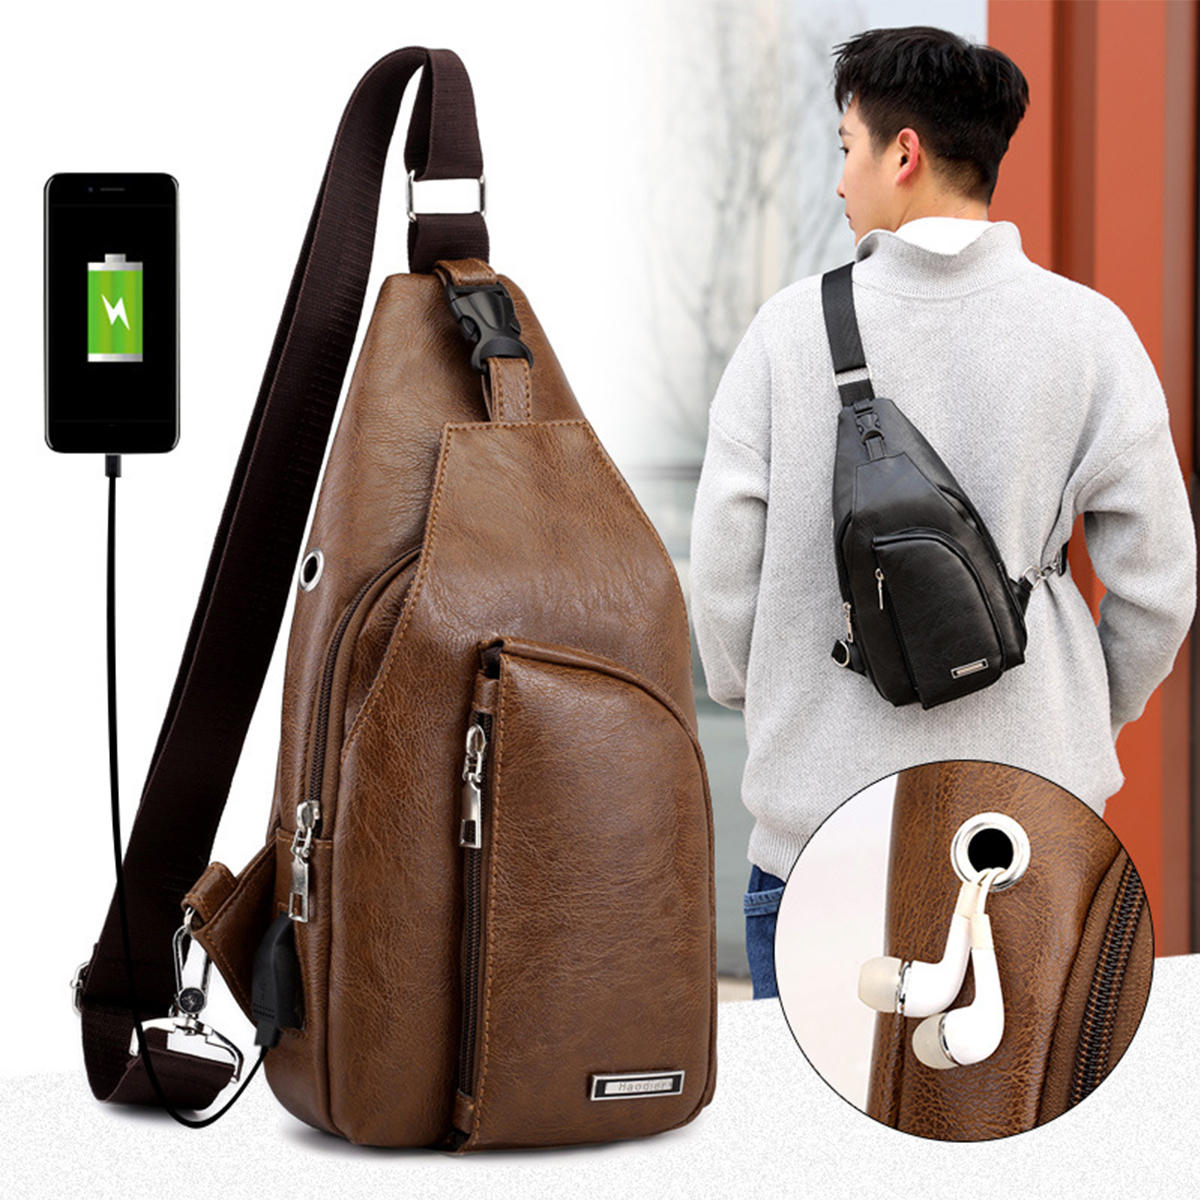 

Men's Fashion PU Leather Sling Bag Chest Shoulder Backpack Waterproof Crossbody Bags with USB Charging Port and Earphone